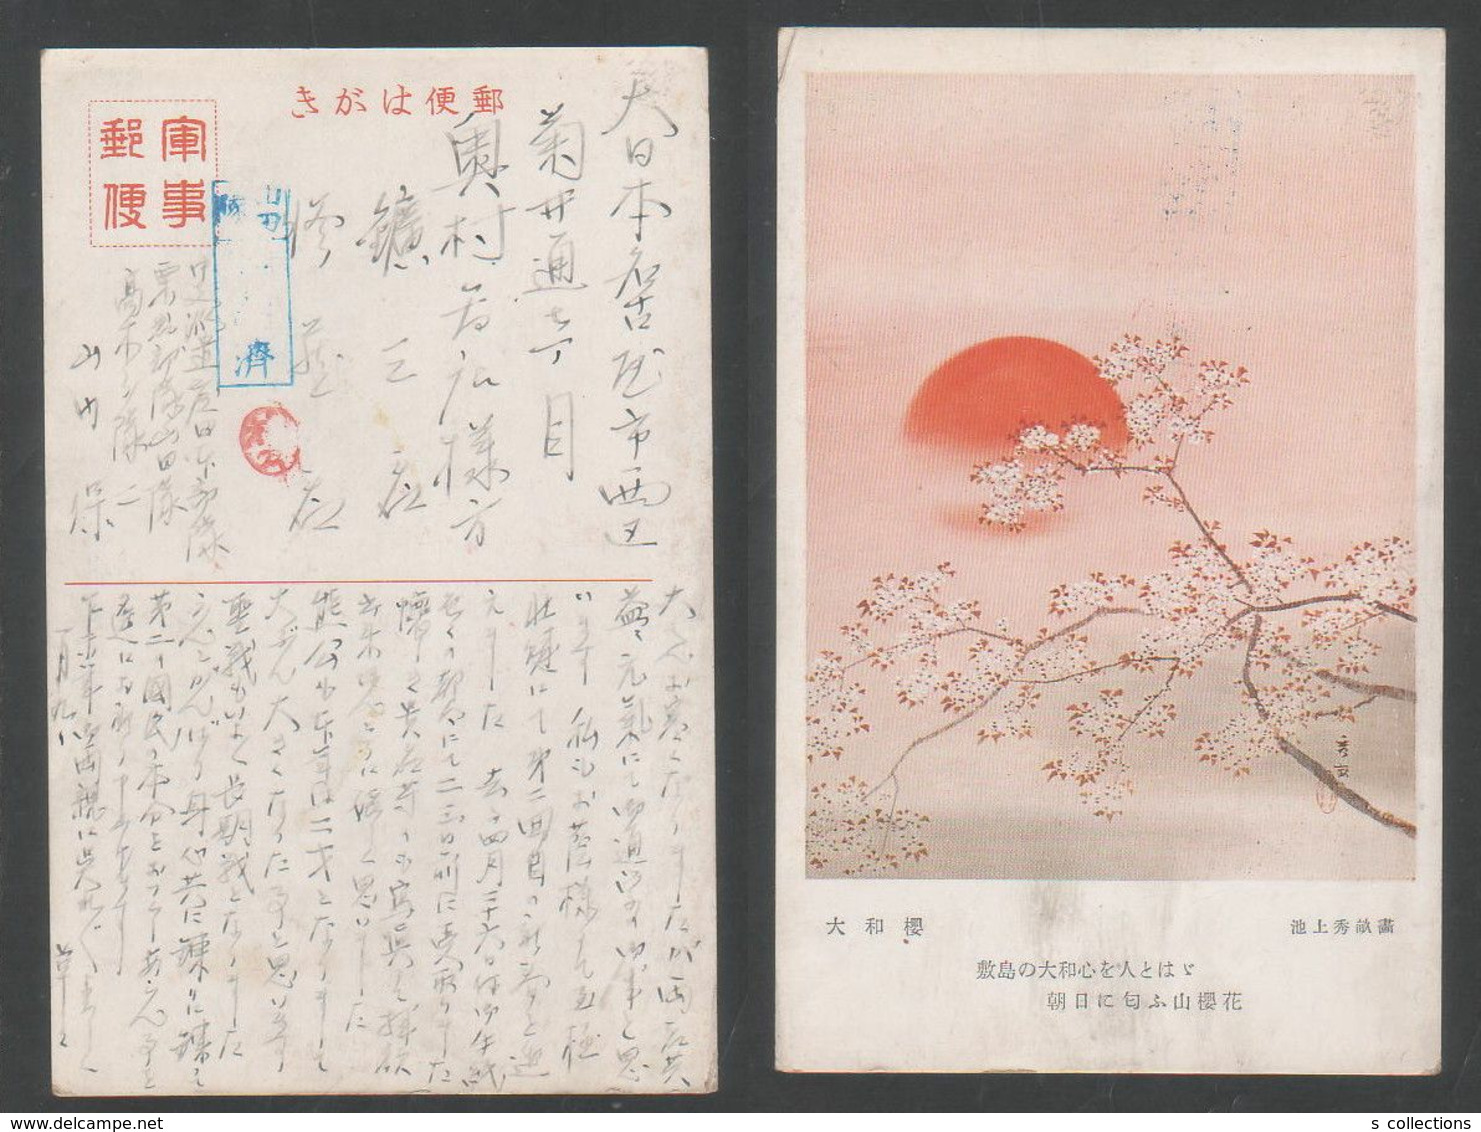 JAPAN WWII Military Yamato Cherry Tree Picture Postcard Central China WW2 MANCHURIA CHINE MANDCHOUKOUO JAPON GIAPPONE - 1943-45 Shanghai & Nanjing